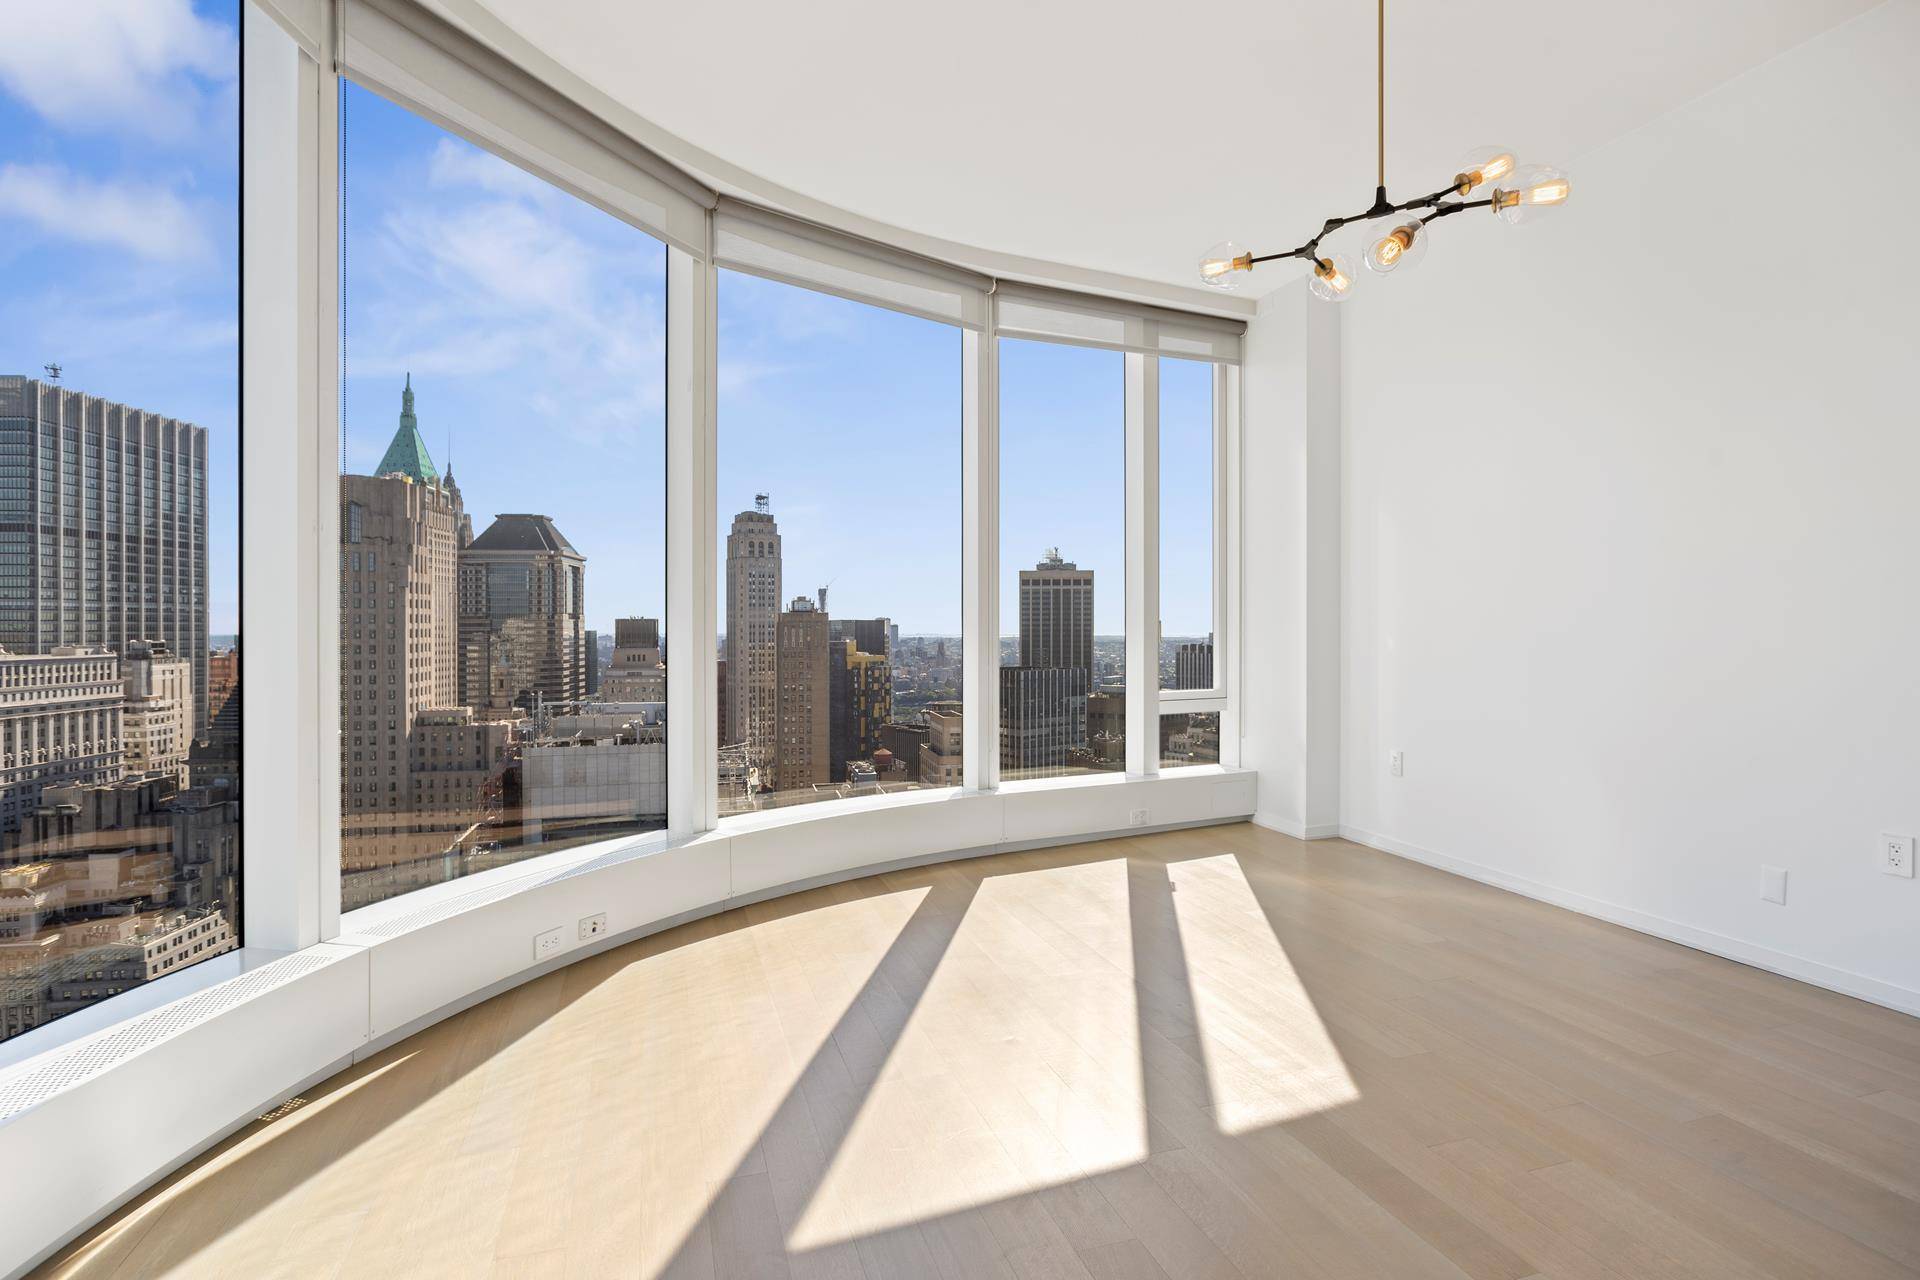 Impeccable views in this designer two bedroom plus a home office, three bathroom masterpiece in the sky.